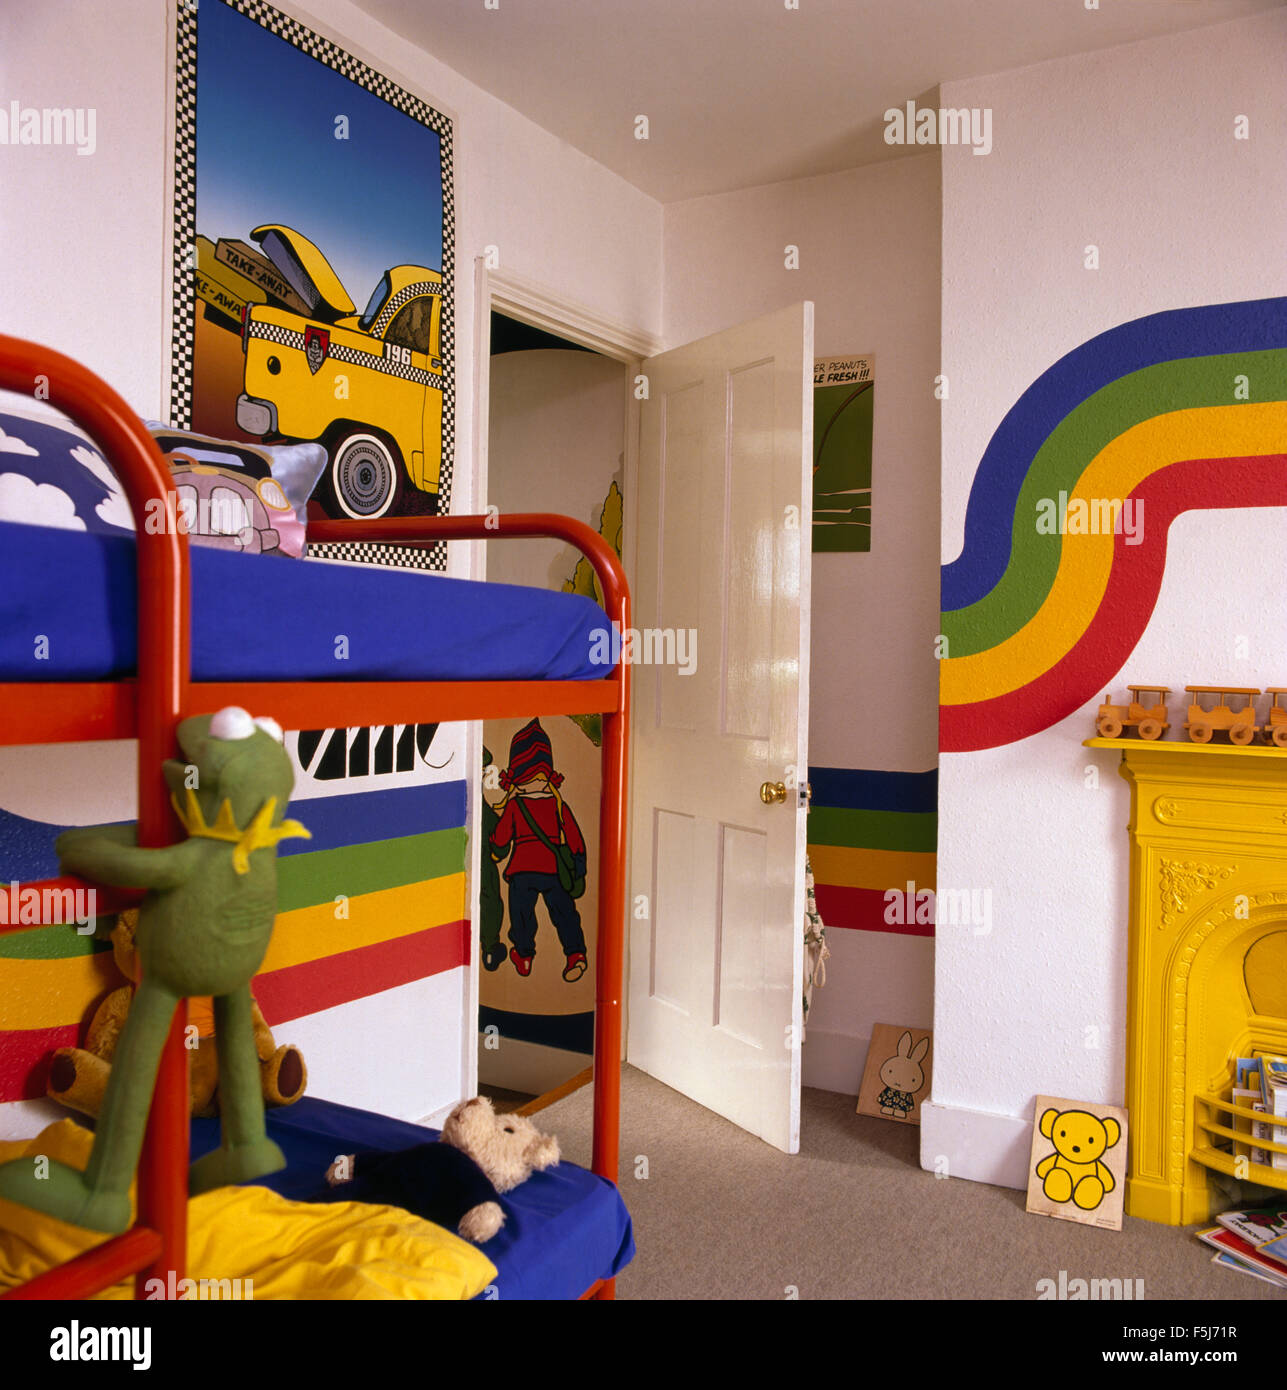 Rainbow stripes painted on walls of a children's colorful seventies bedroom with red metal bunk beds Stock Photo